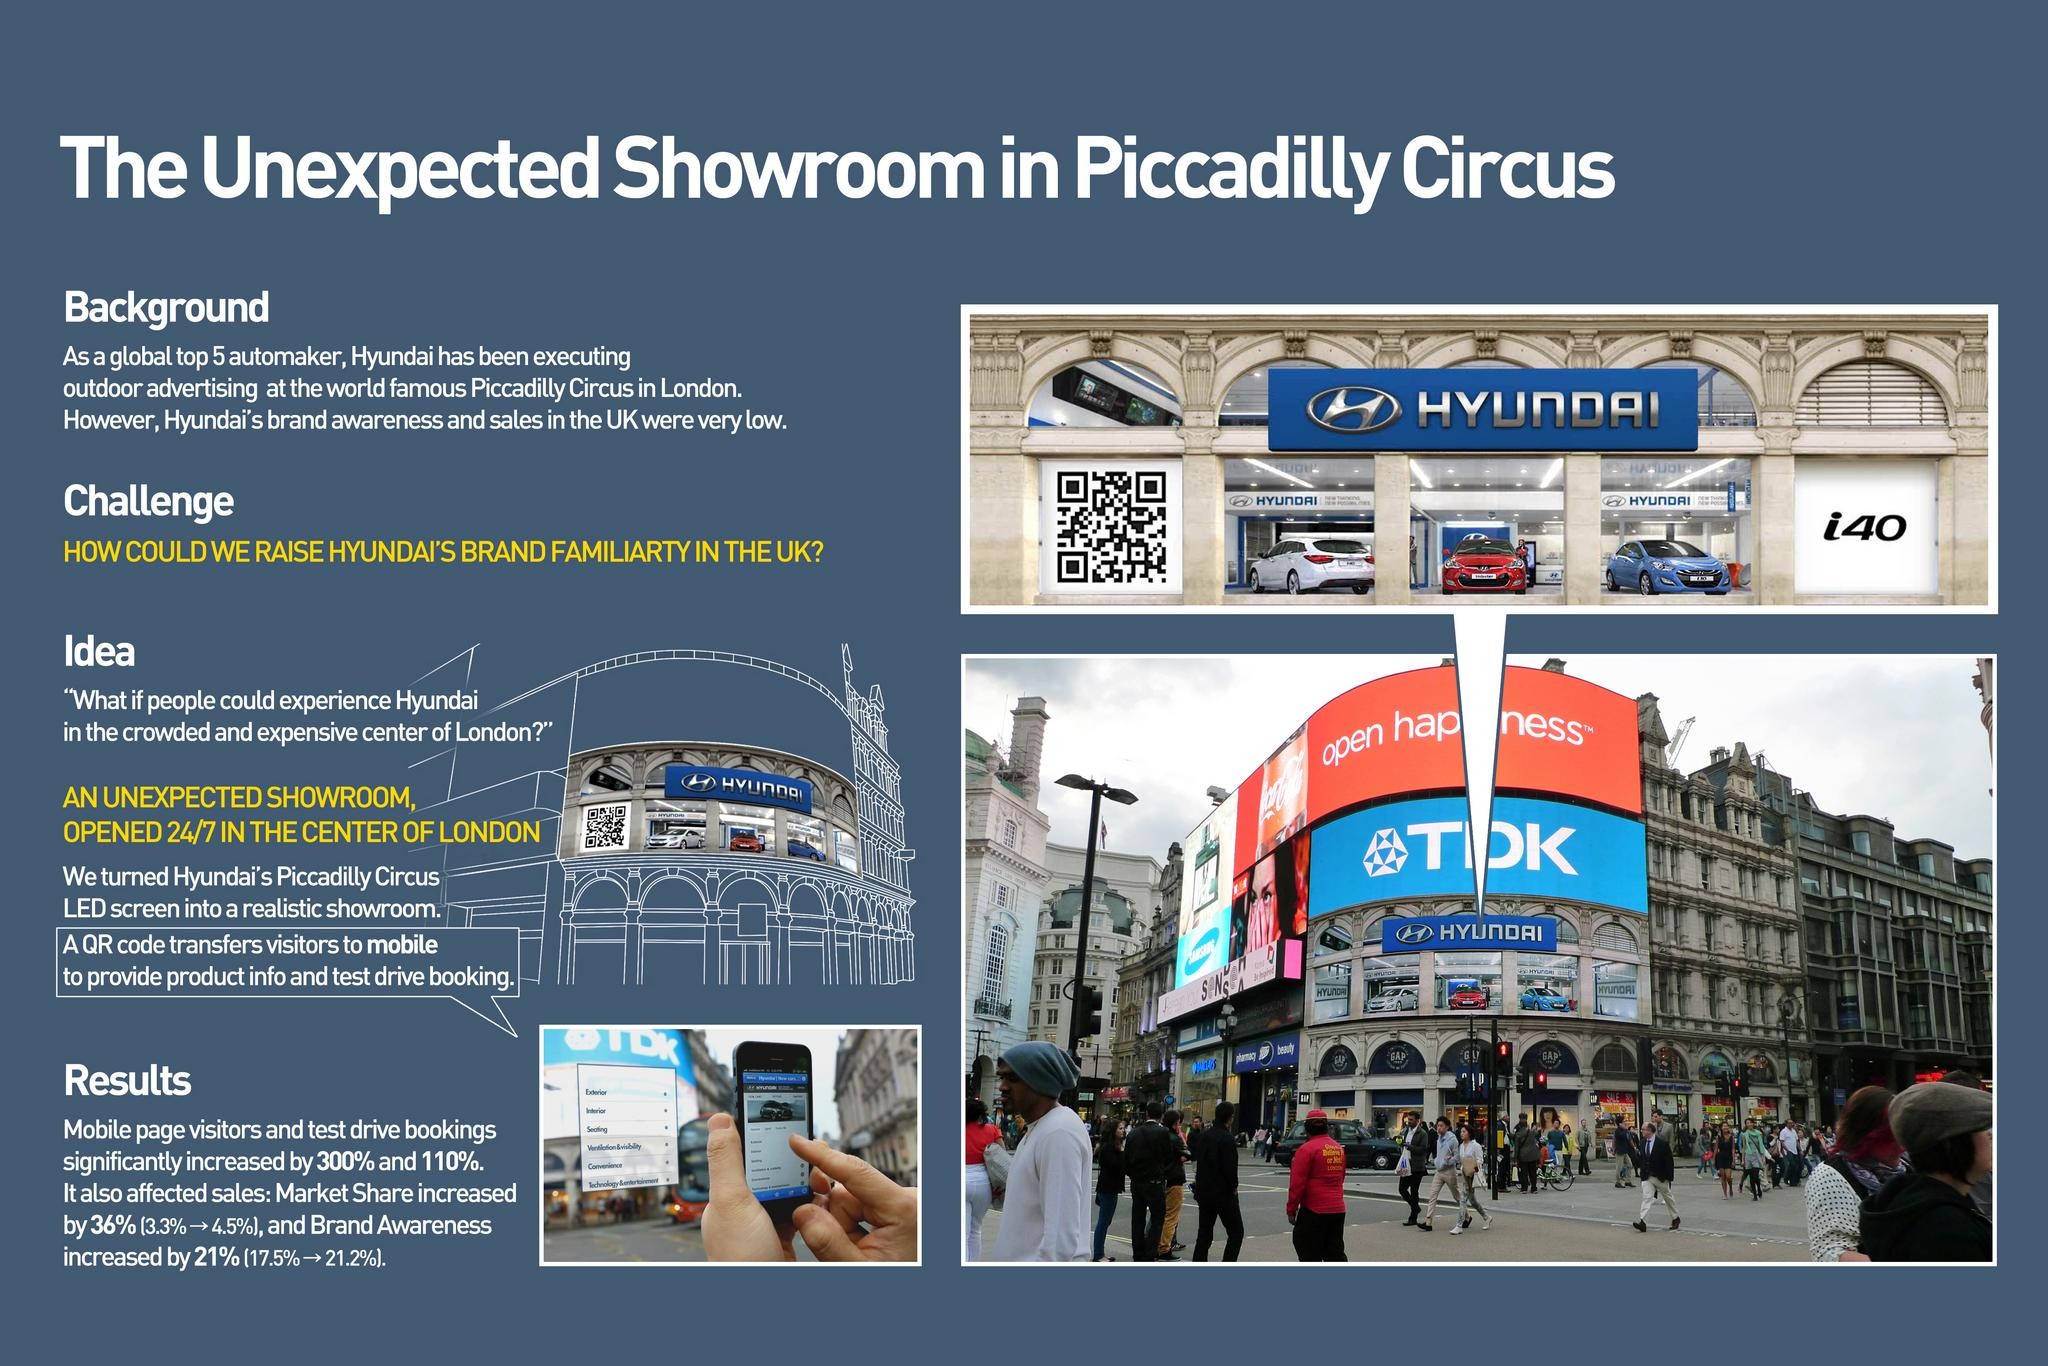 THE UNEXPECTED SHOWROOM IN PICCADILLY CIRCUS